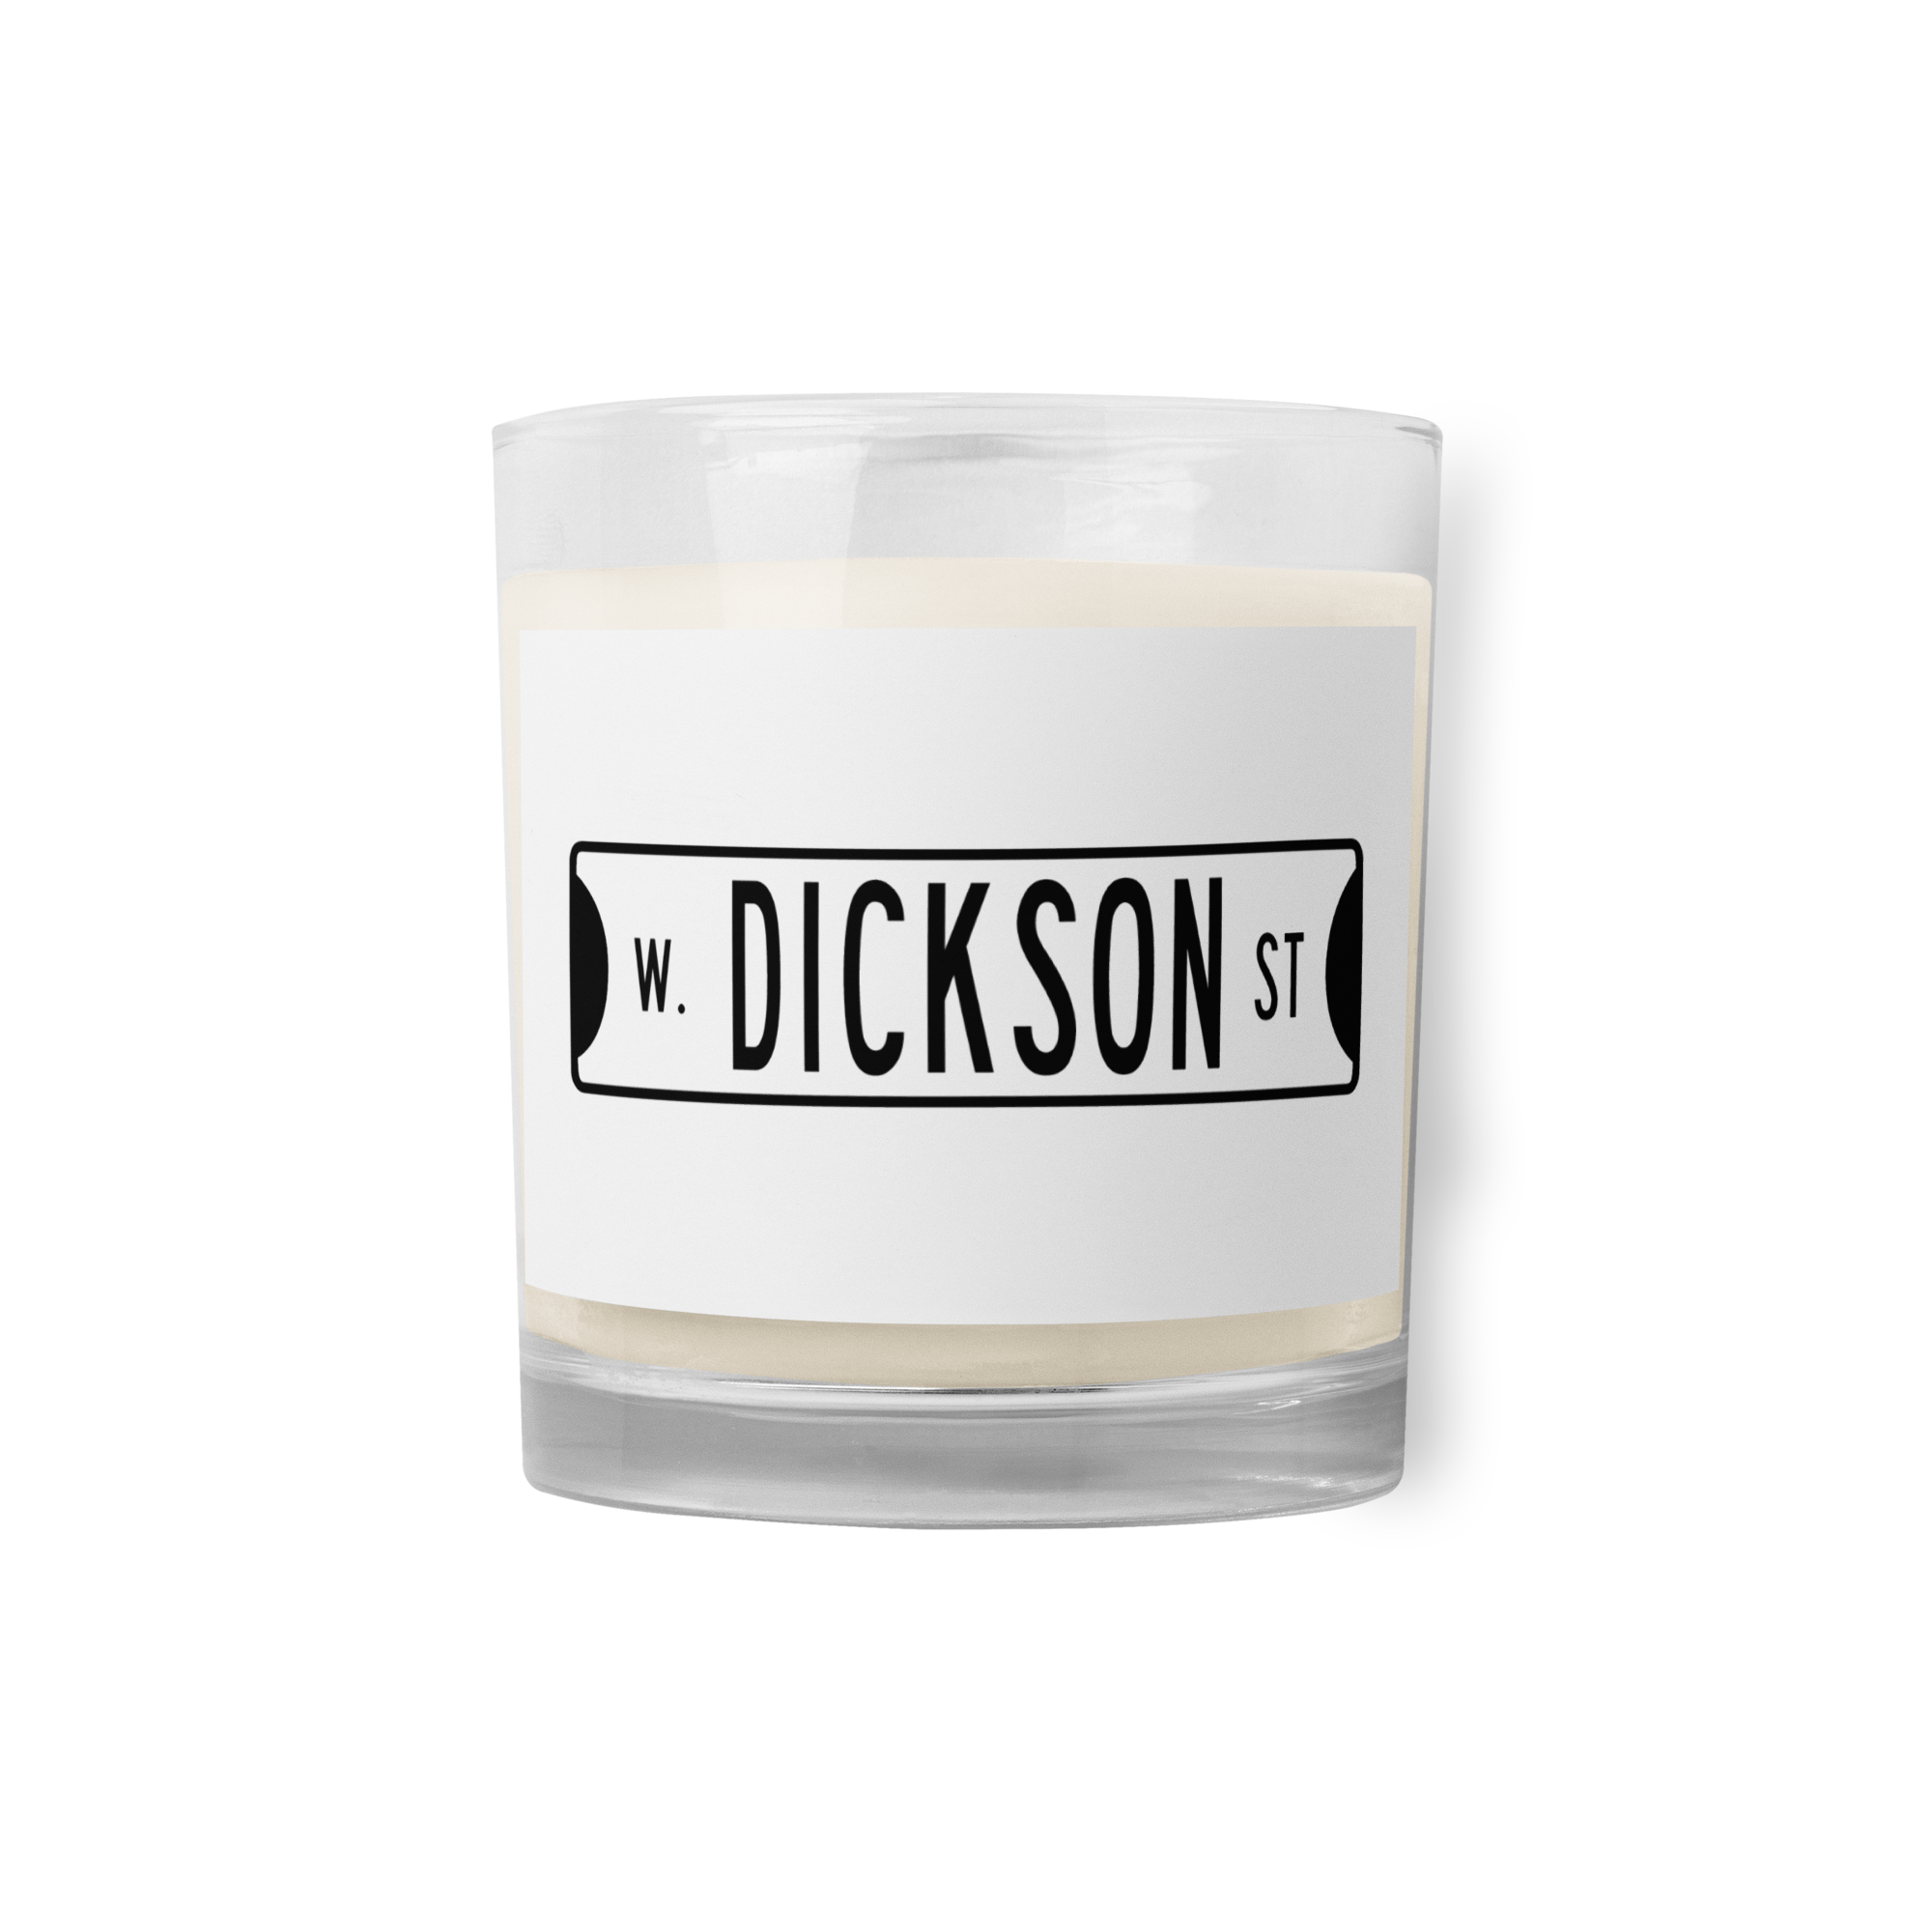 Retro Dickson Street Sign Glass Jar Soy Wax Candle